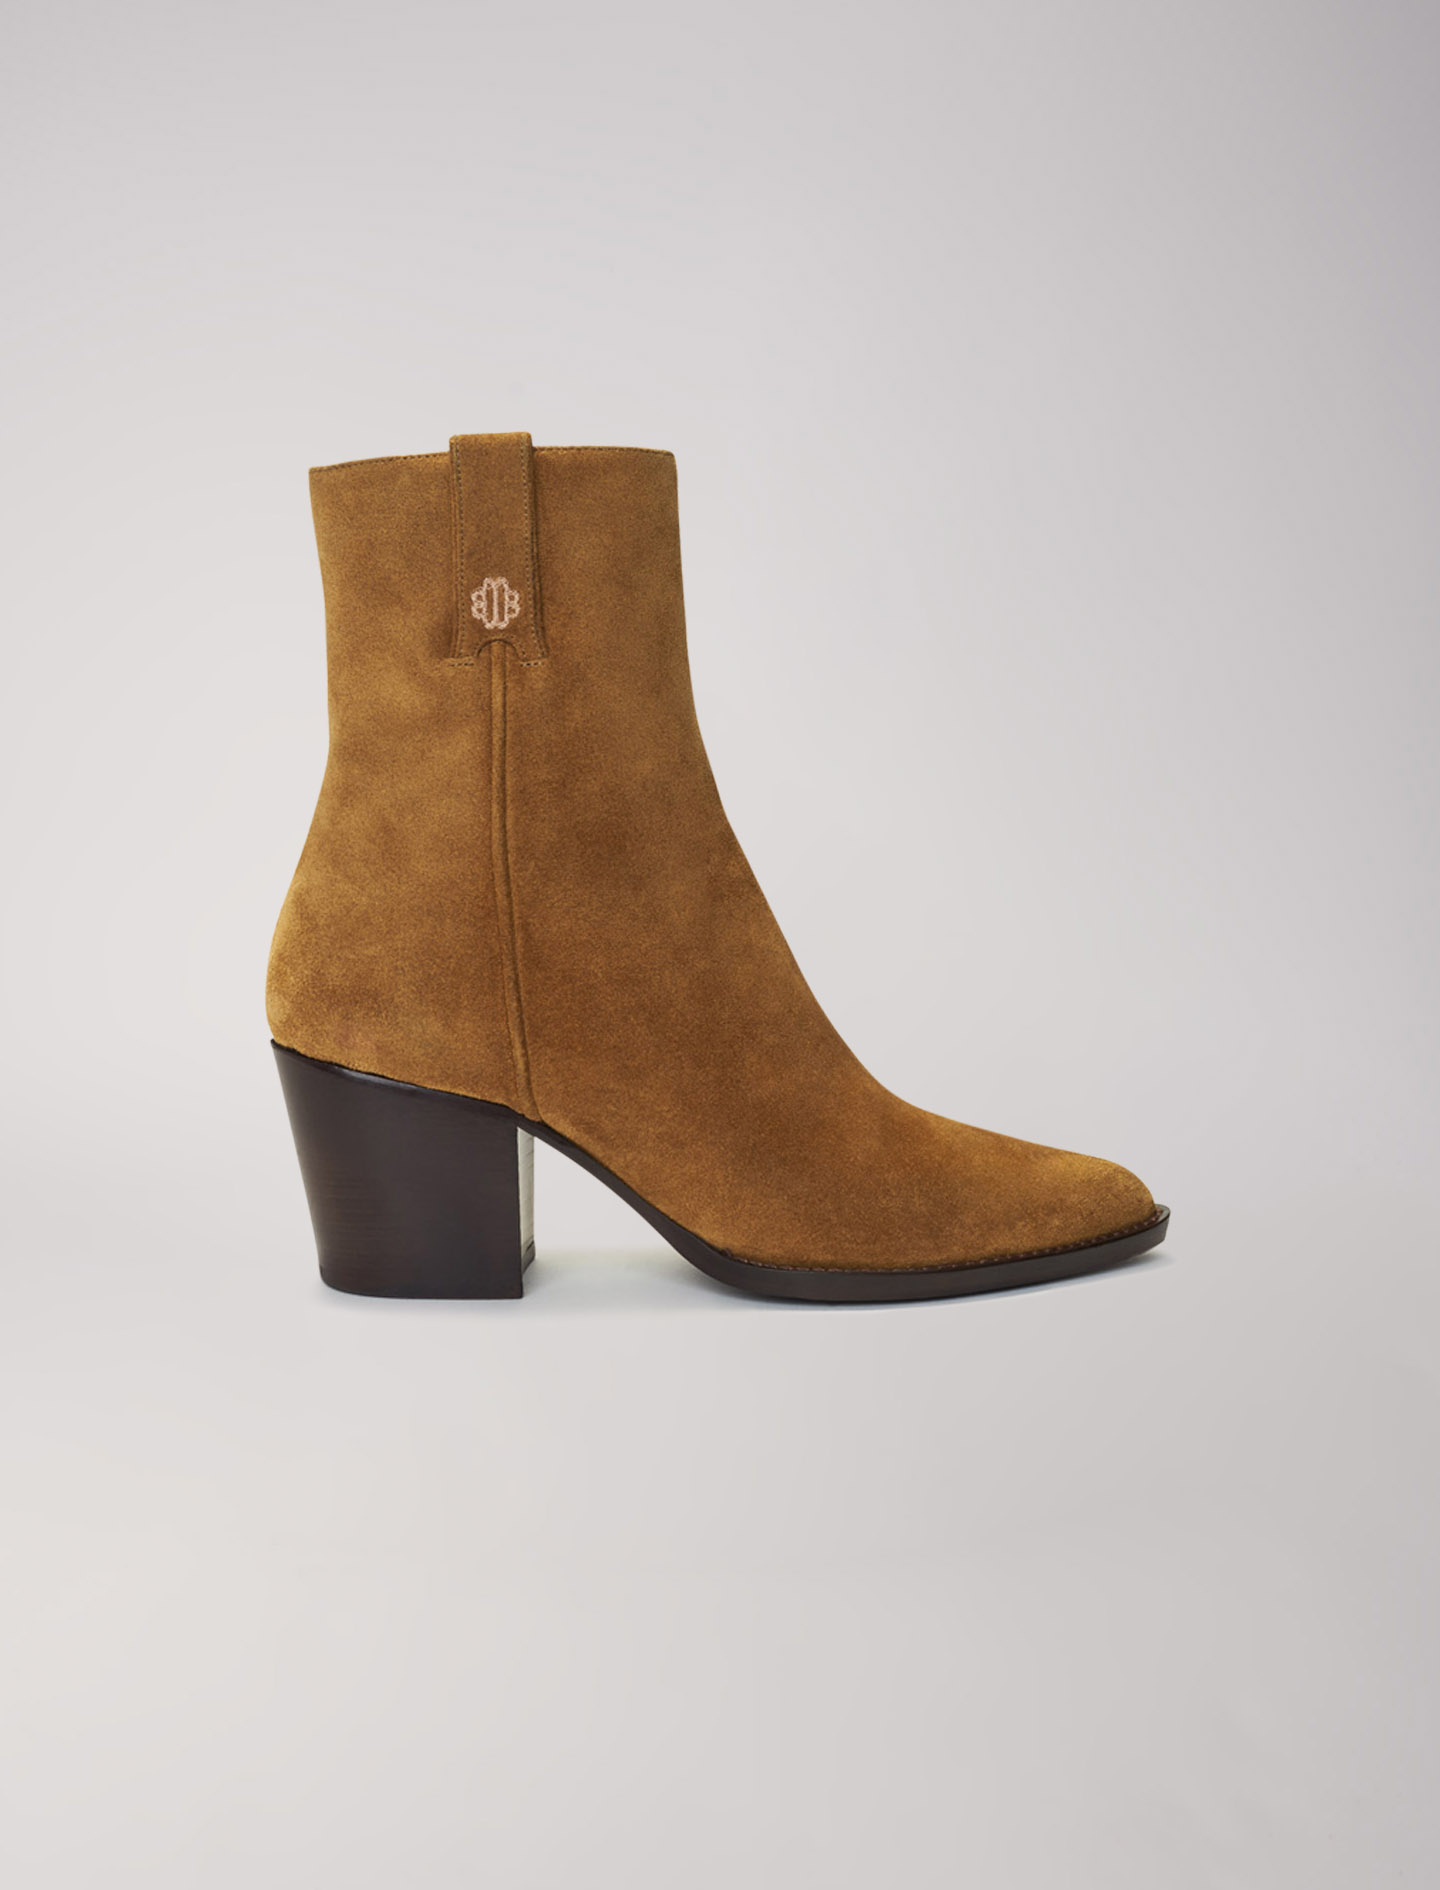 , in camel suede leather